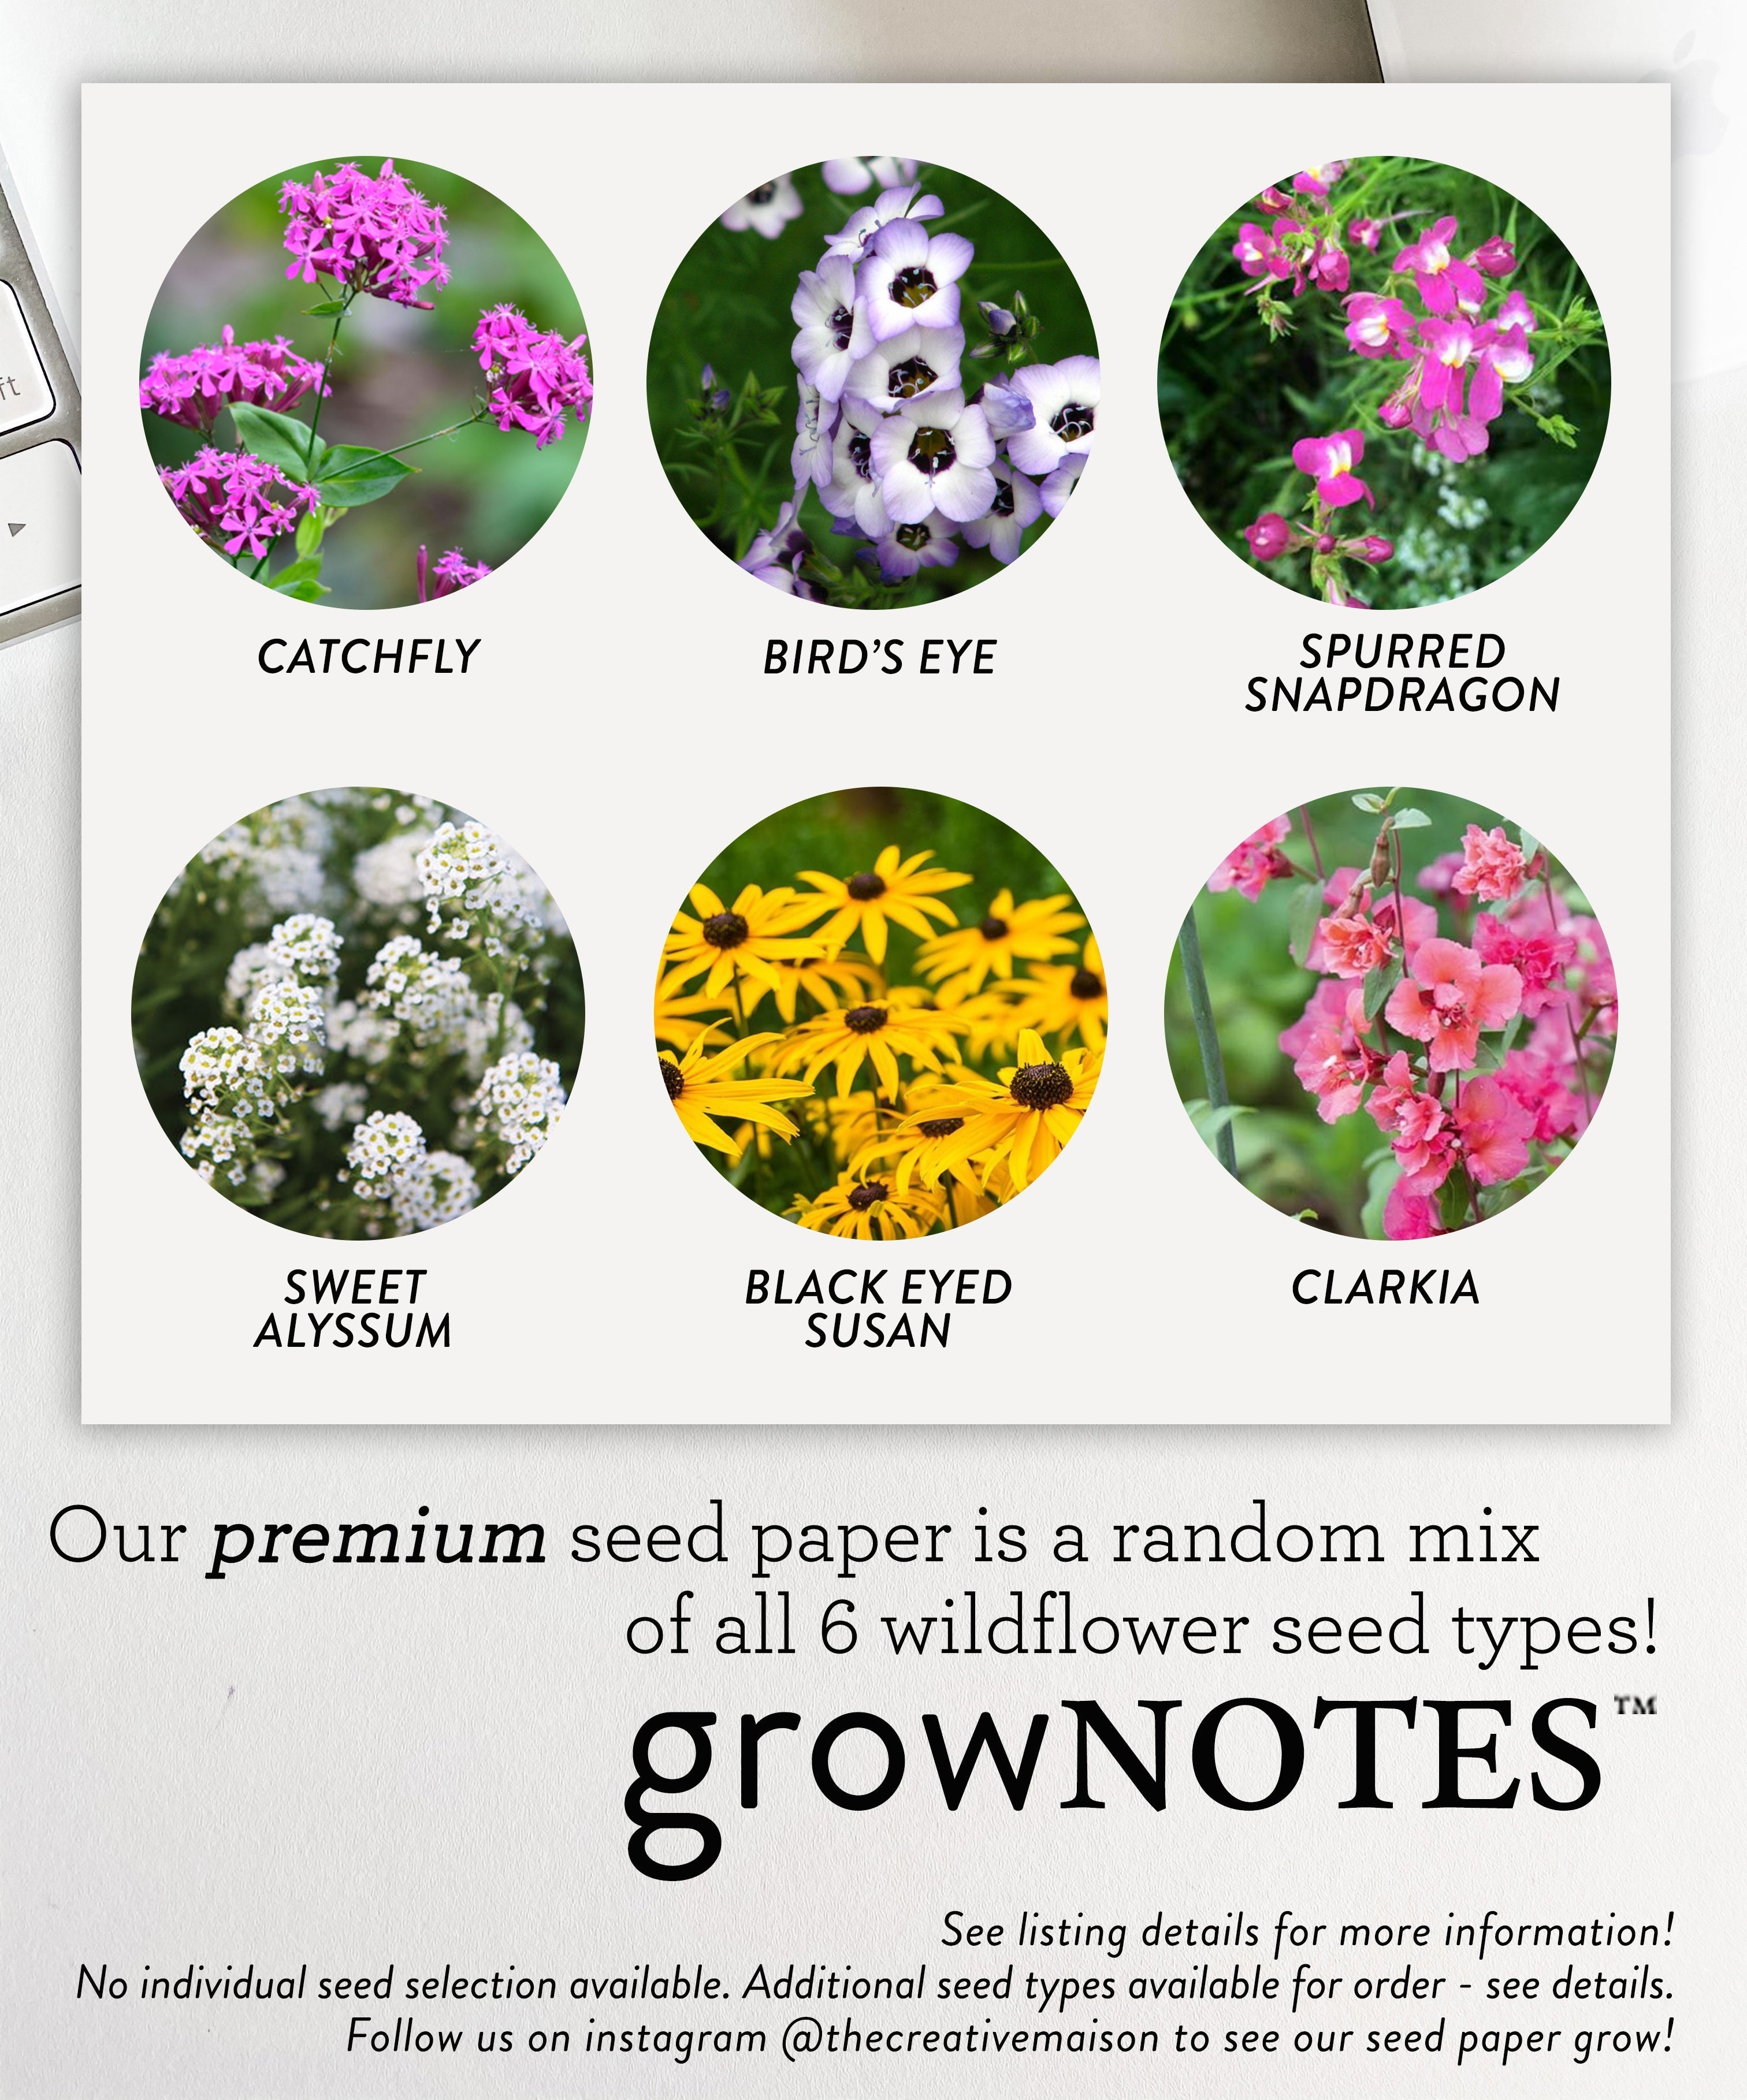 growNOTES™ Holiday Greeting Cards on Plantable Seed Paper - Seeds & Greetings Blue Mantel